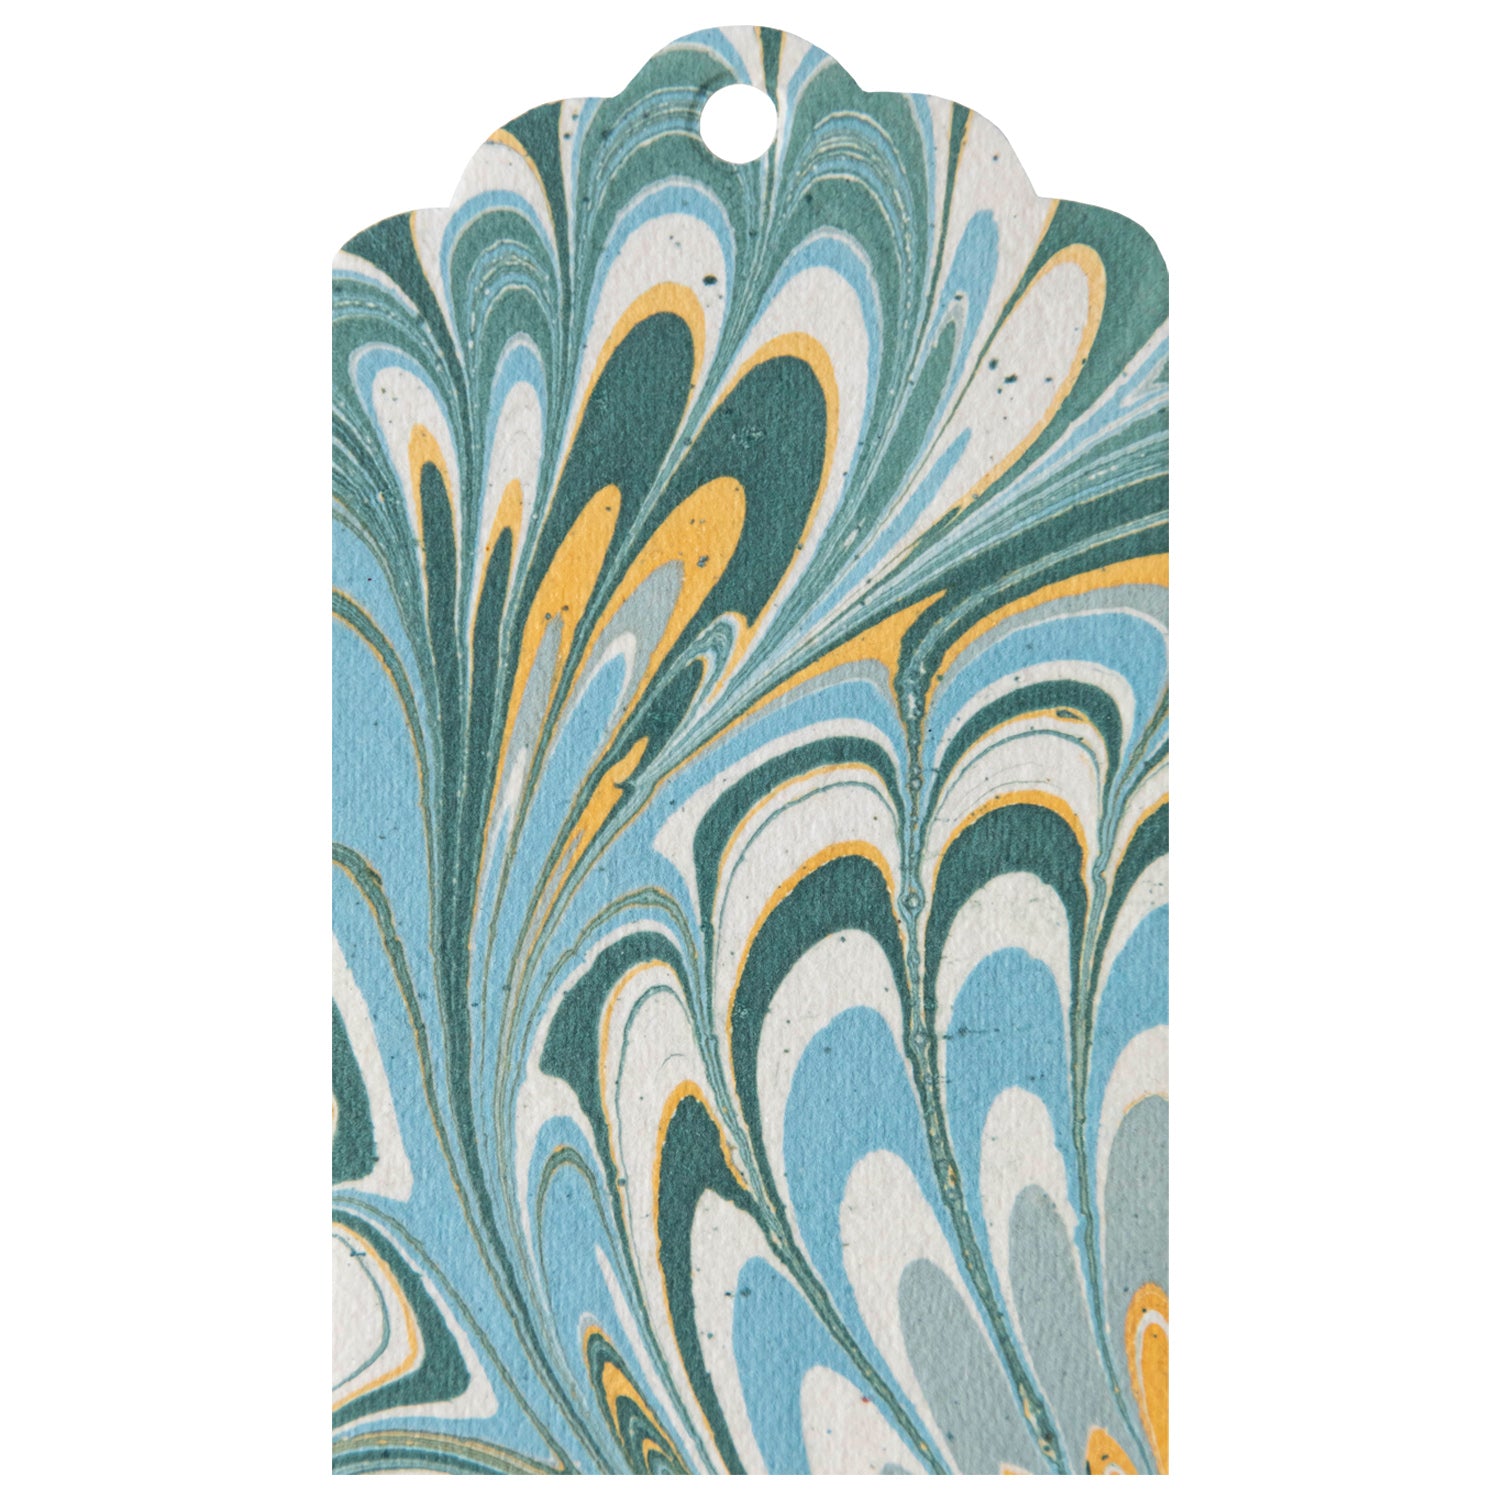 A unique blue and yellow Peacock Marbled Gift Tag made from handmade papers by Hester &amp; Cook.